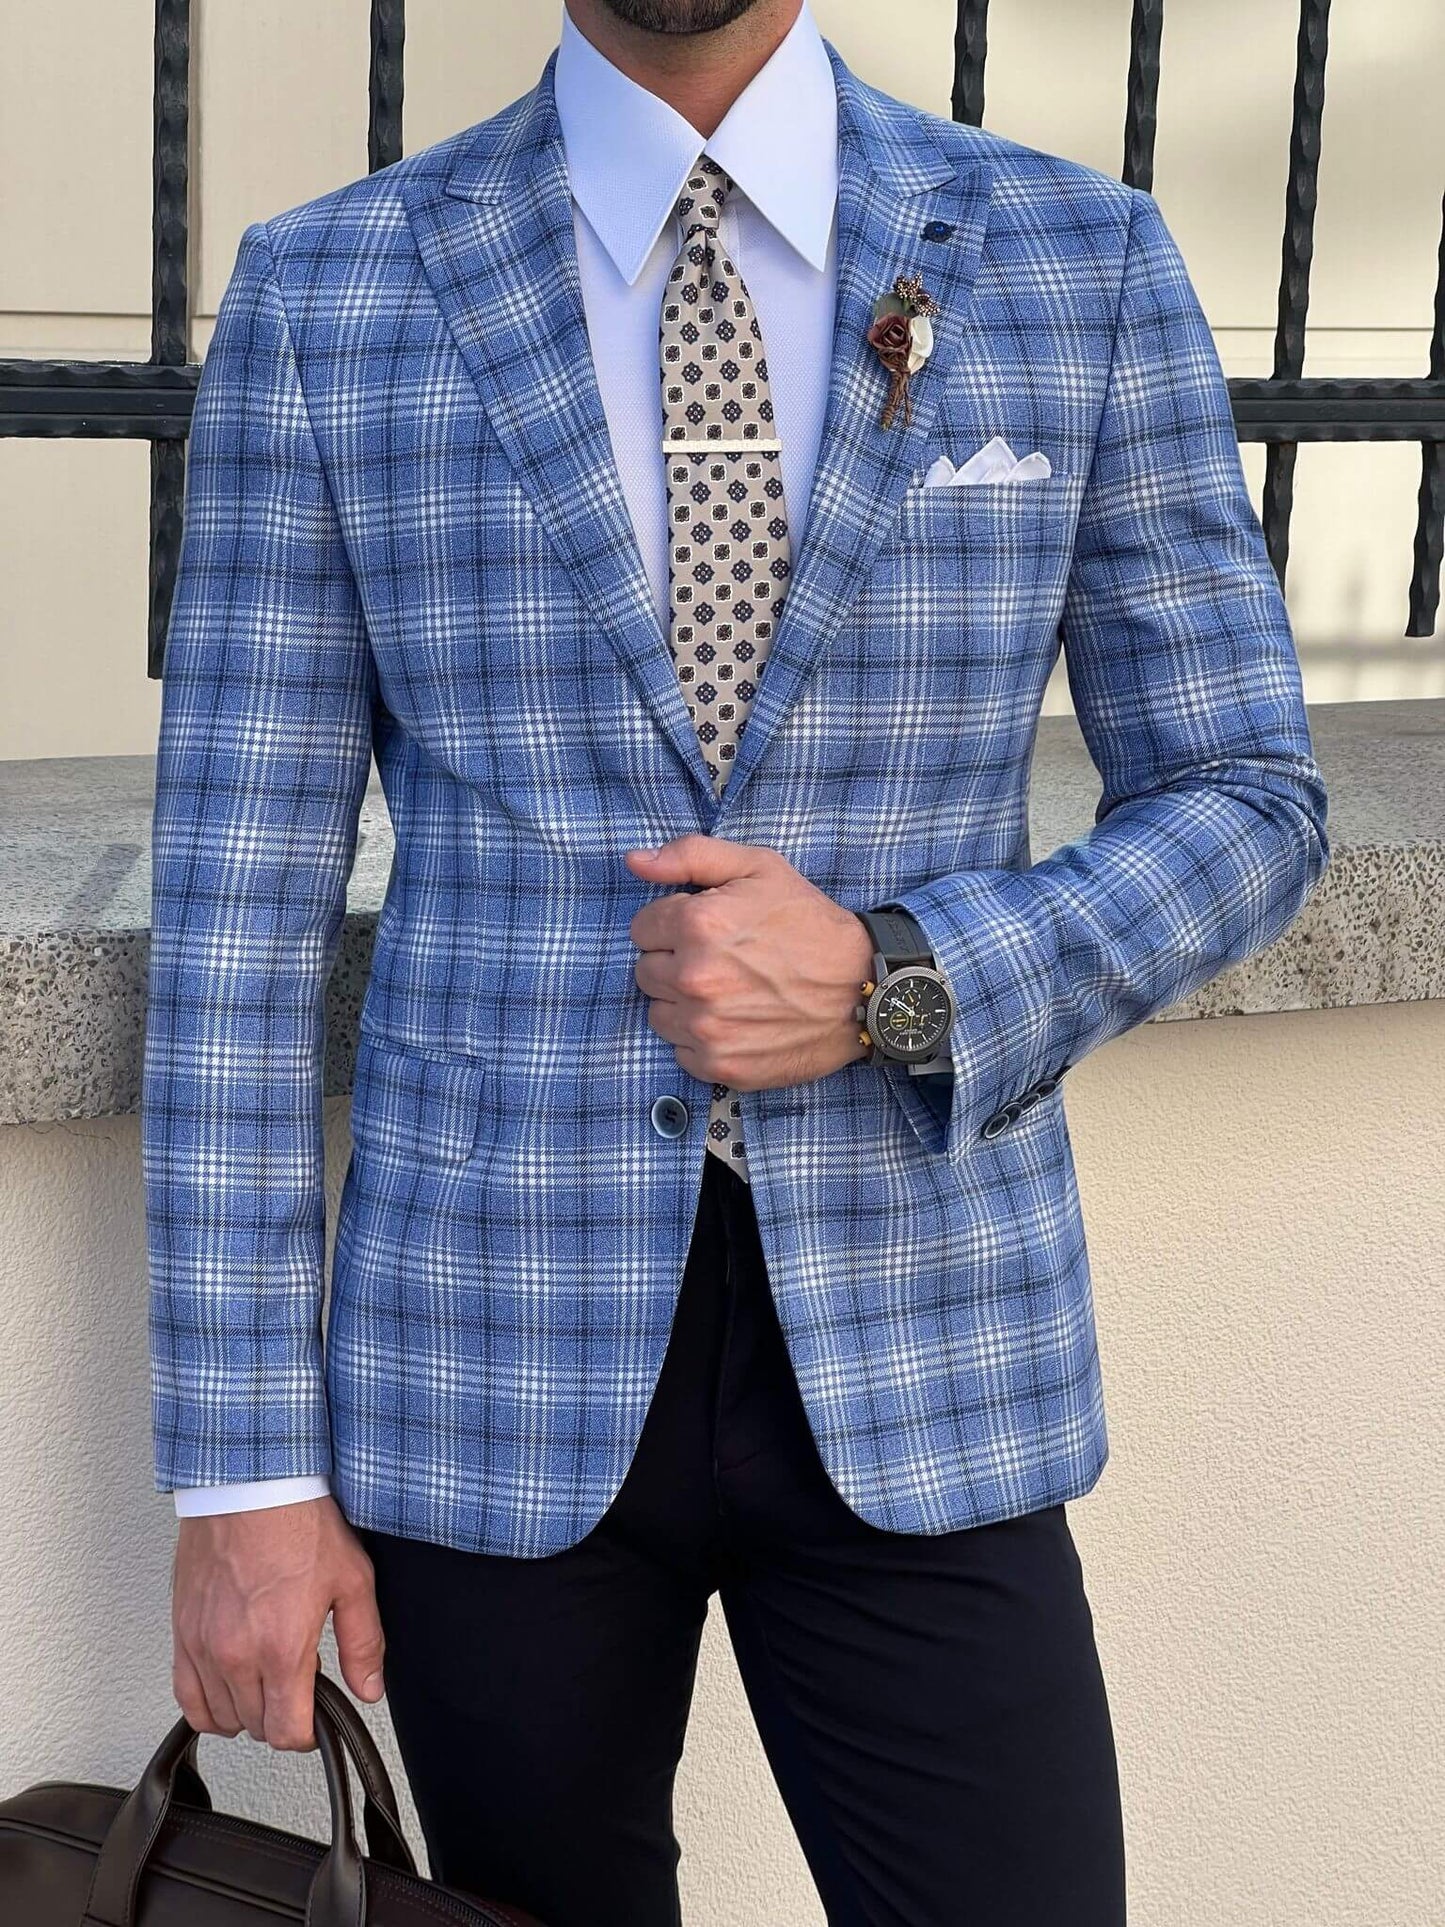 Blue jacket with a unique Nikkei pattern